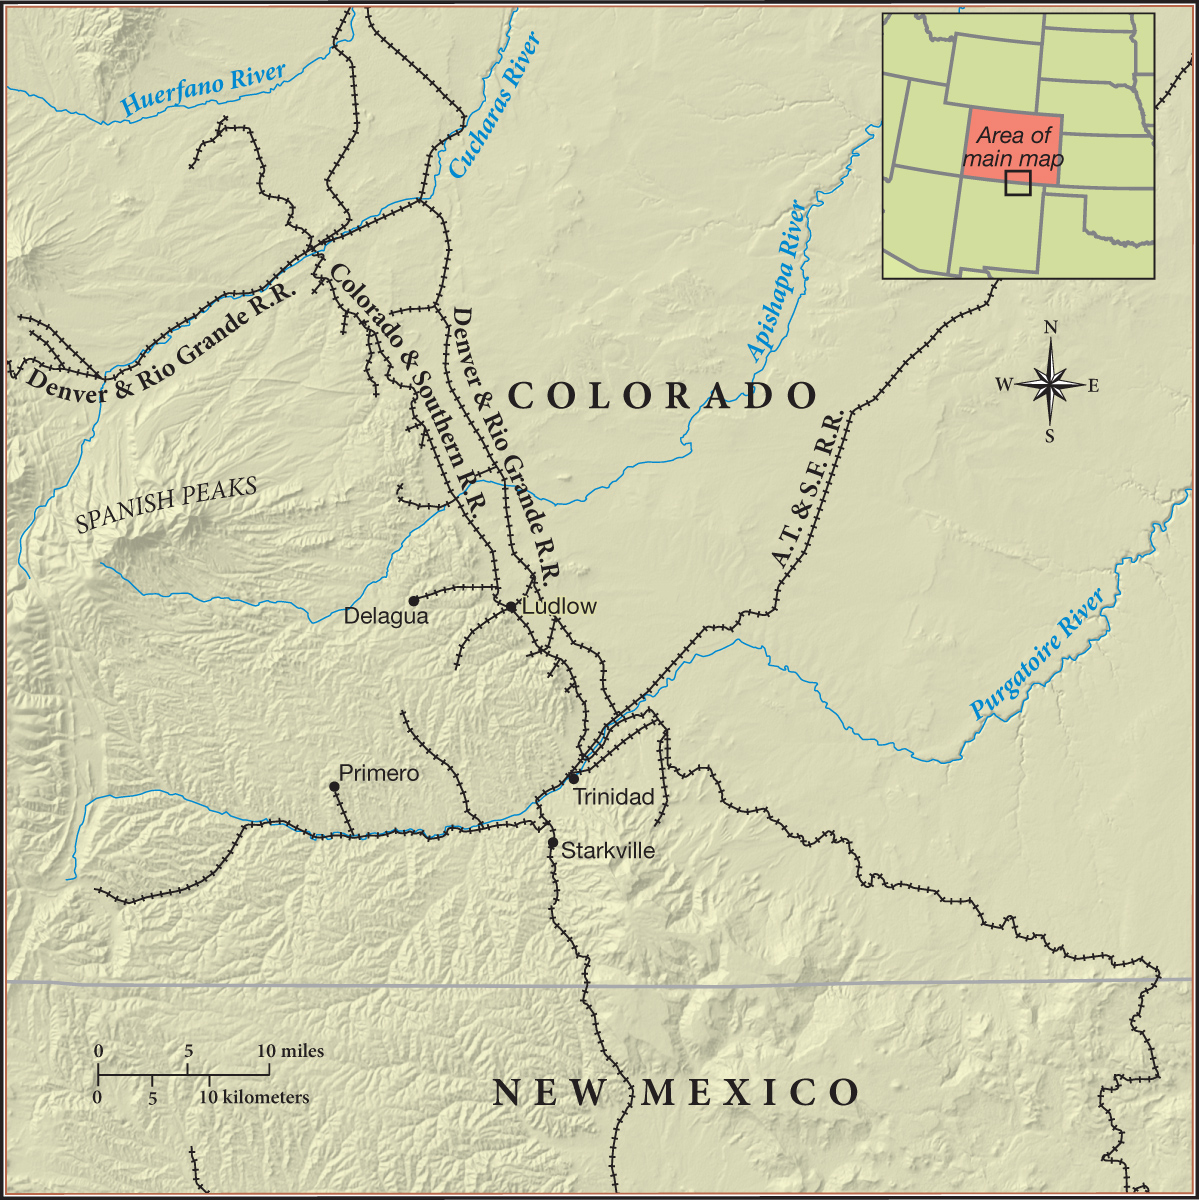 The Ill-Fated Mines of the Southern Colorado Coalfields